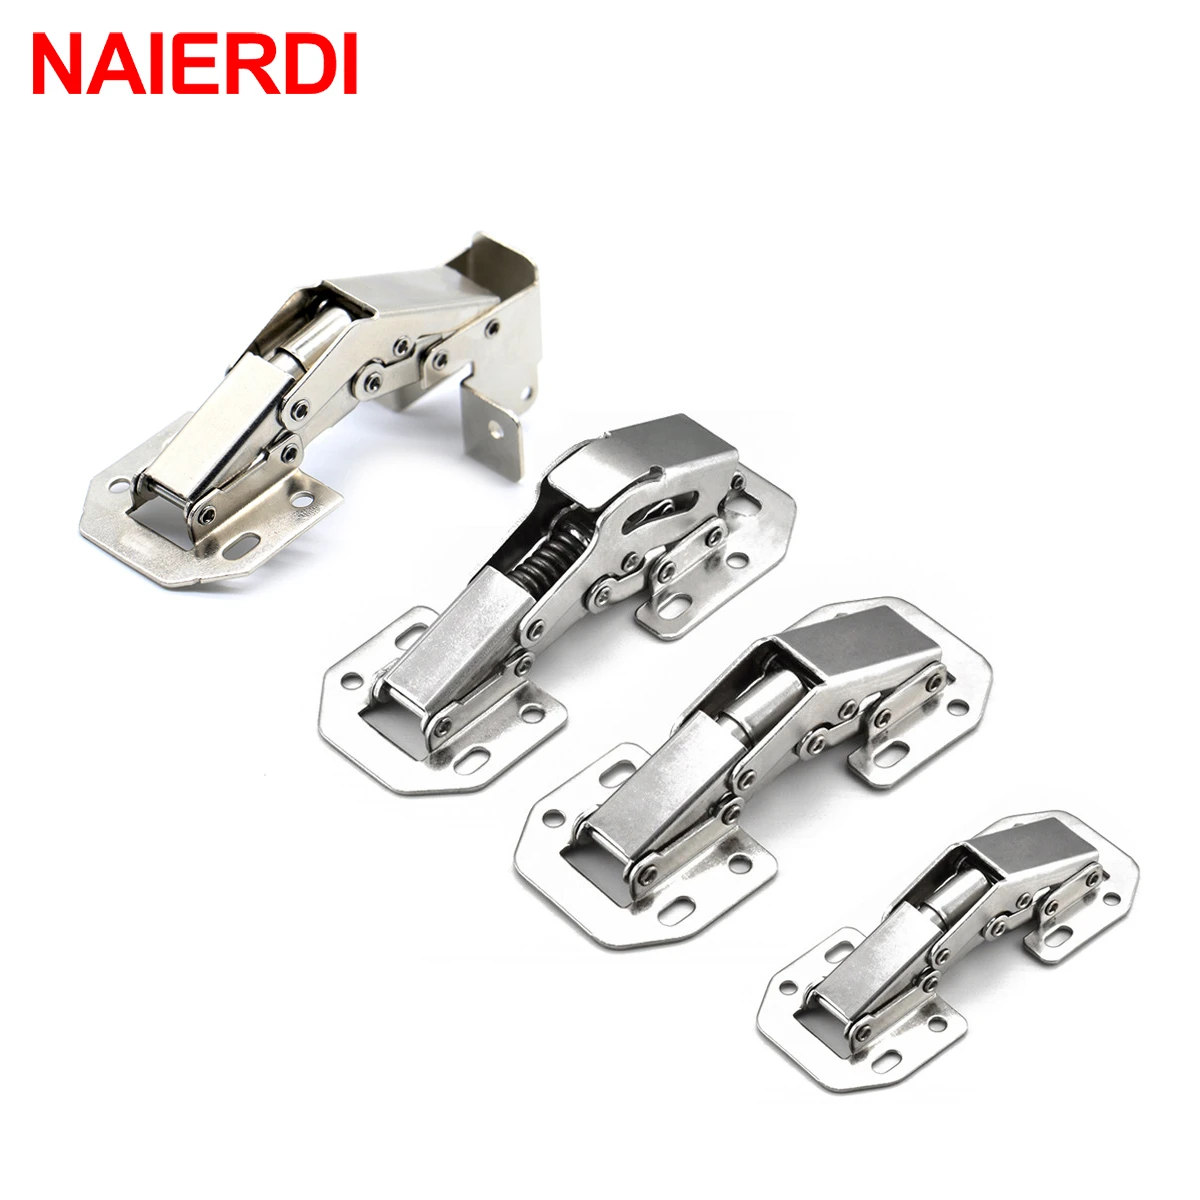 NAIERDI Cabinet Hinge 90 Degree No-Drilling Hole Cupboard Door Hydraulic Hinges Soft Close With Screws Furniture Hardware